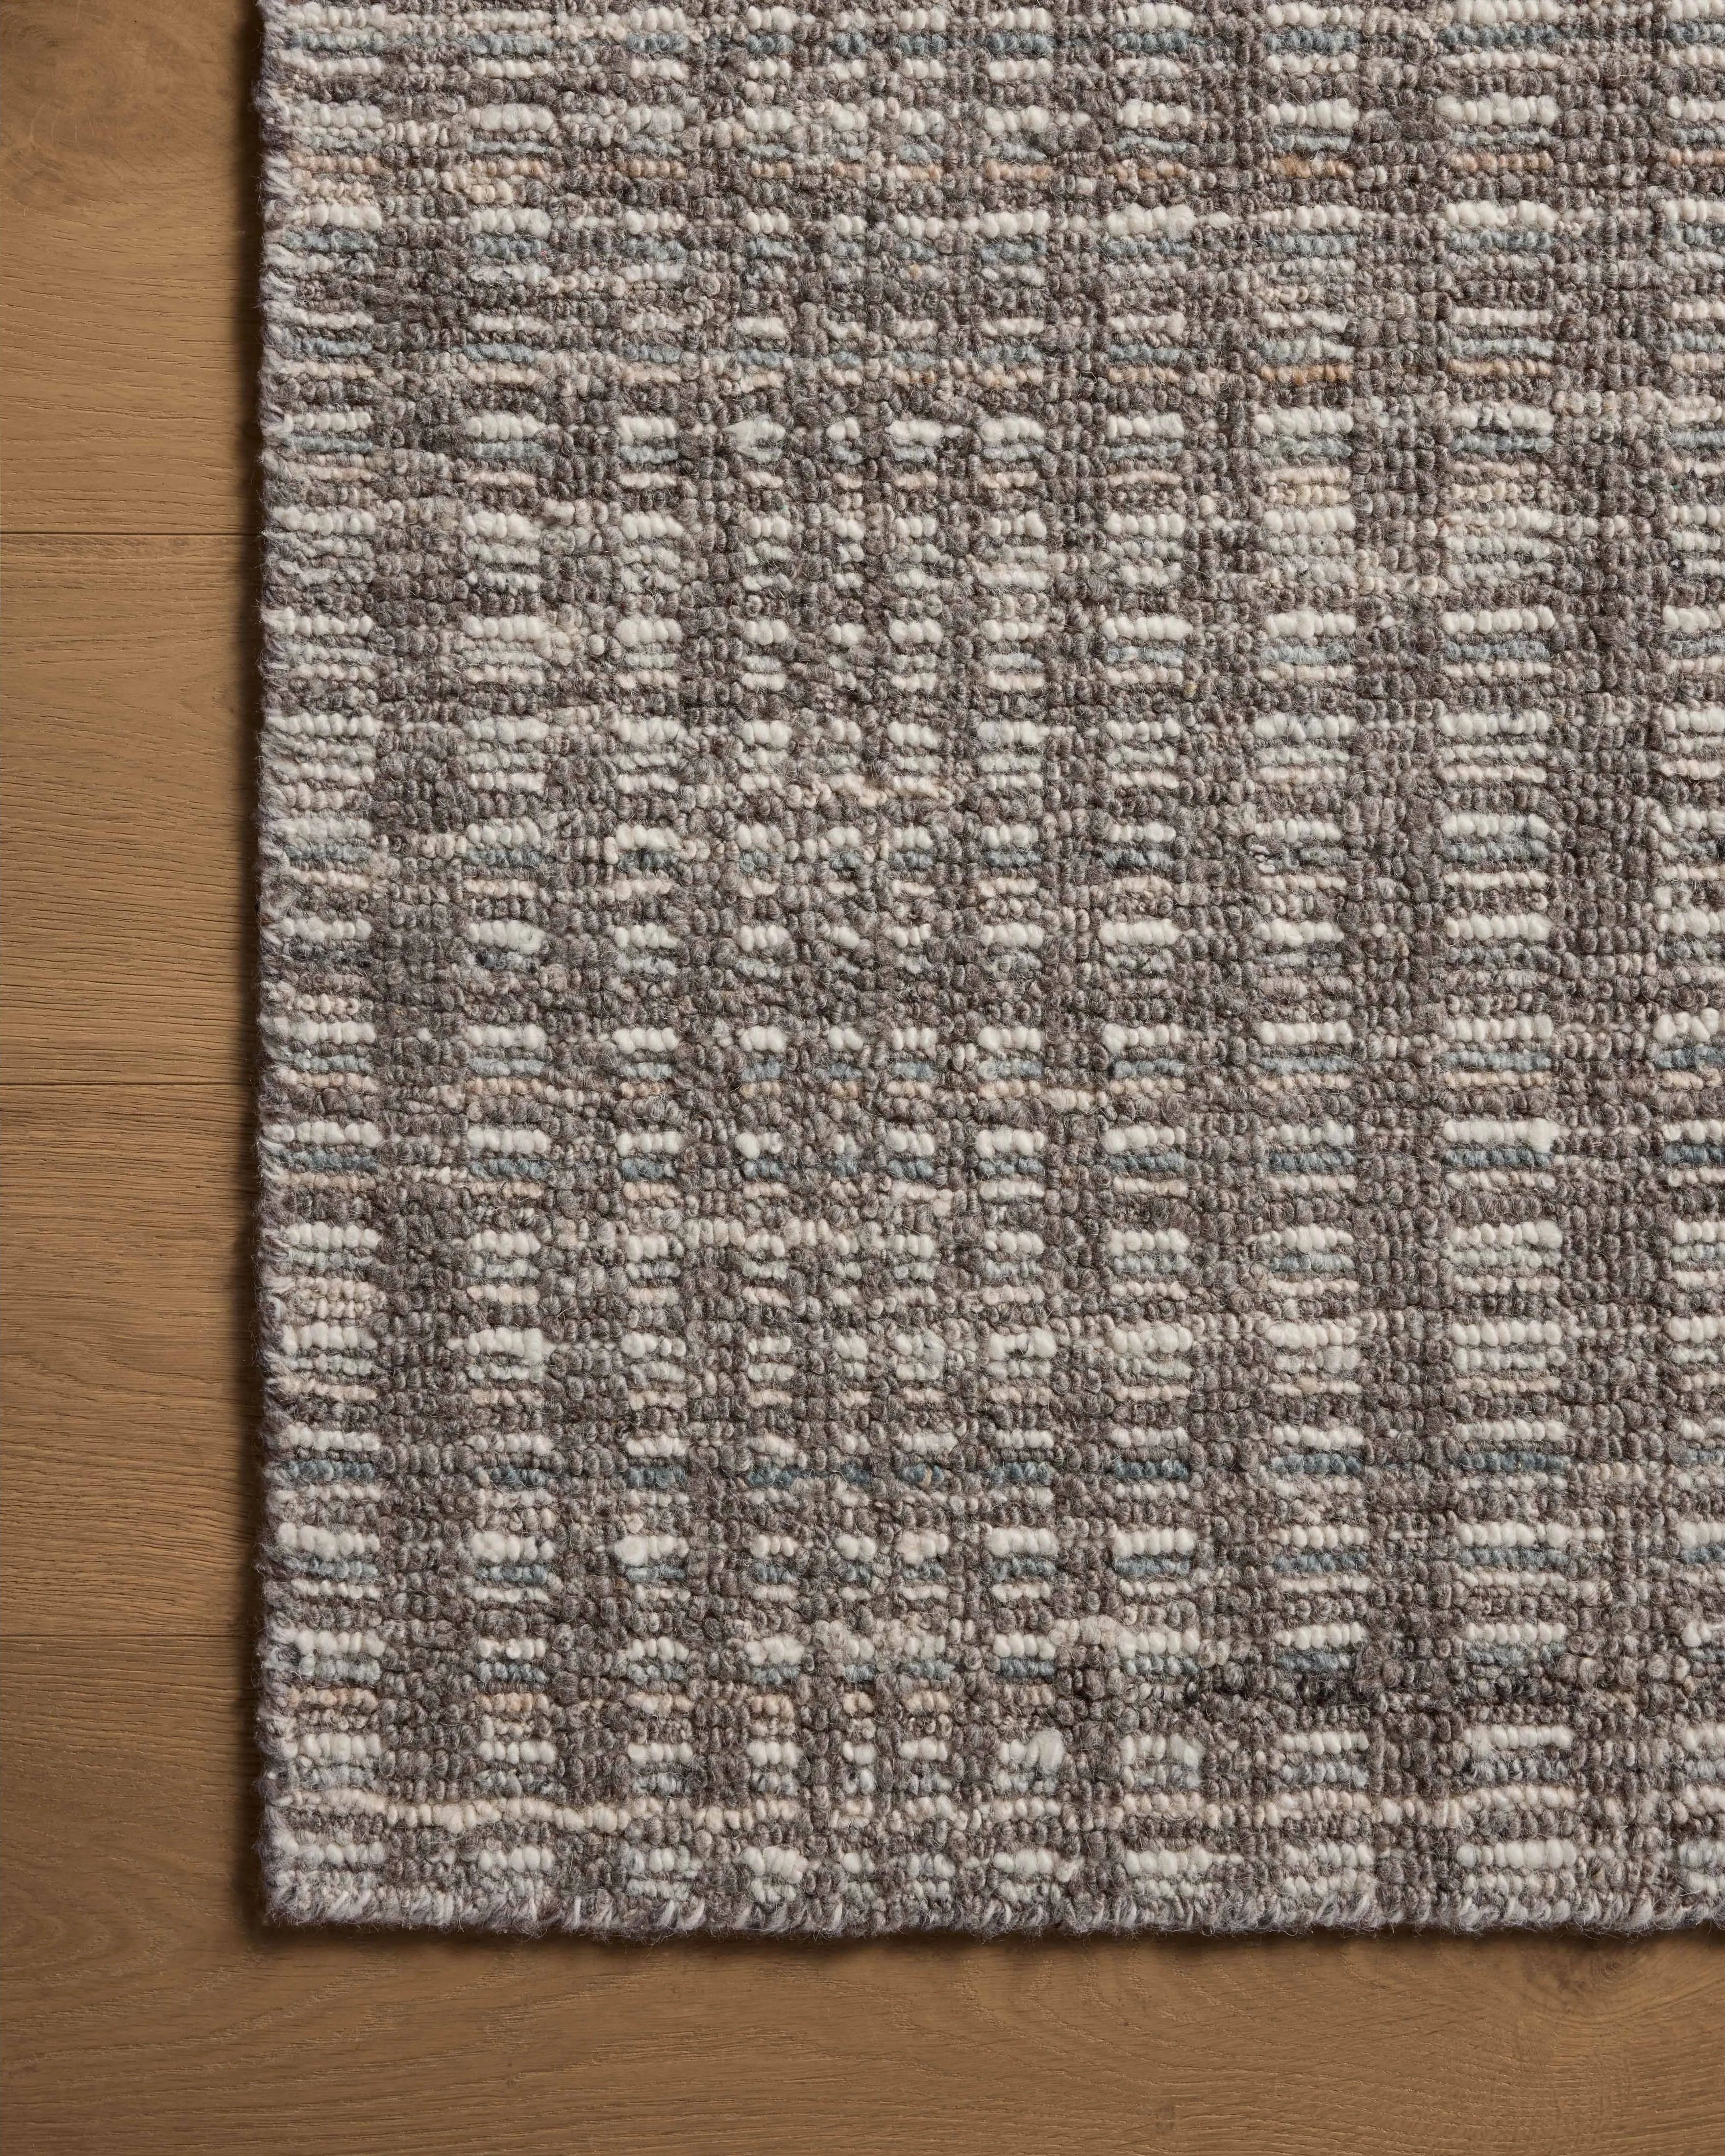 The Sonya Granite / Multi Rug is a hand-loomed area rug with a light, airy palette and understated graphic design. The rug’s textural pile is a soft blend of wool and nylon that creates dimension in living rooms, bedrooms, and more. Amethyst Home provides interior design, new home construction design consulting, vintage area rugs, and lighting in the Tampa metro area.